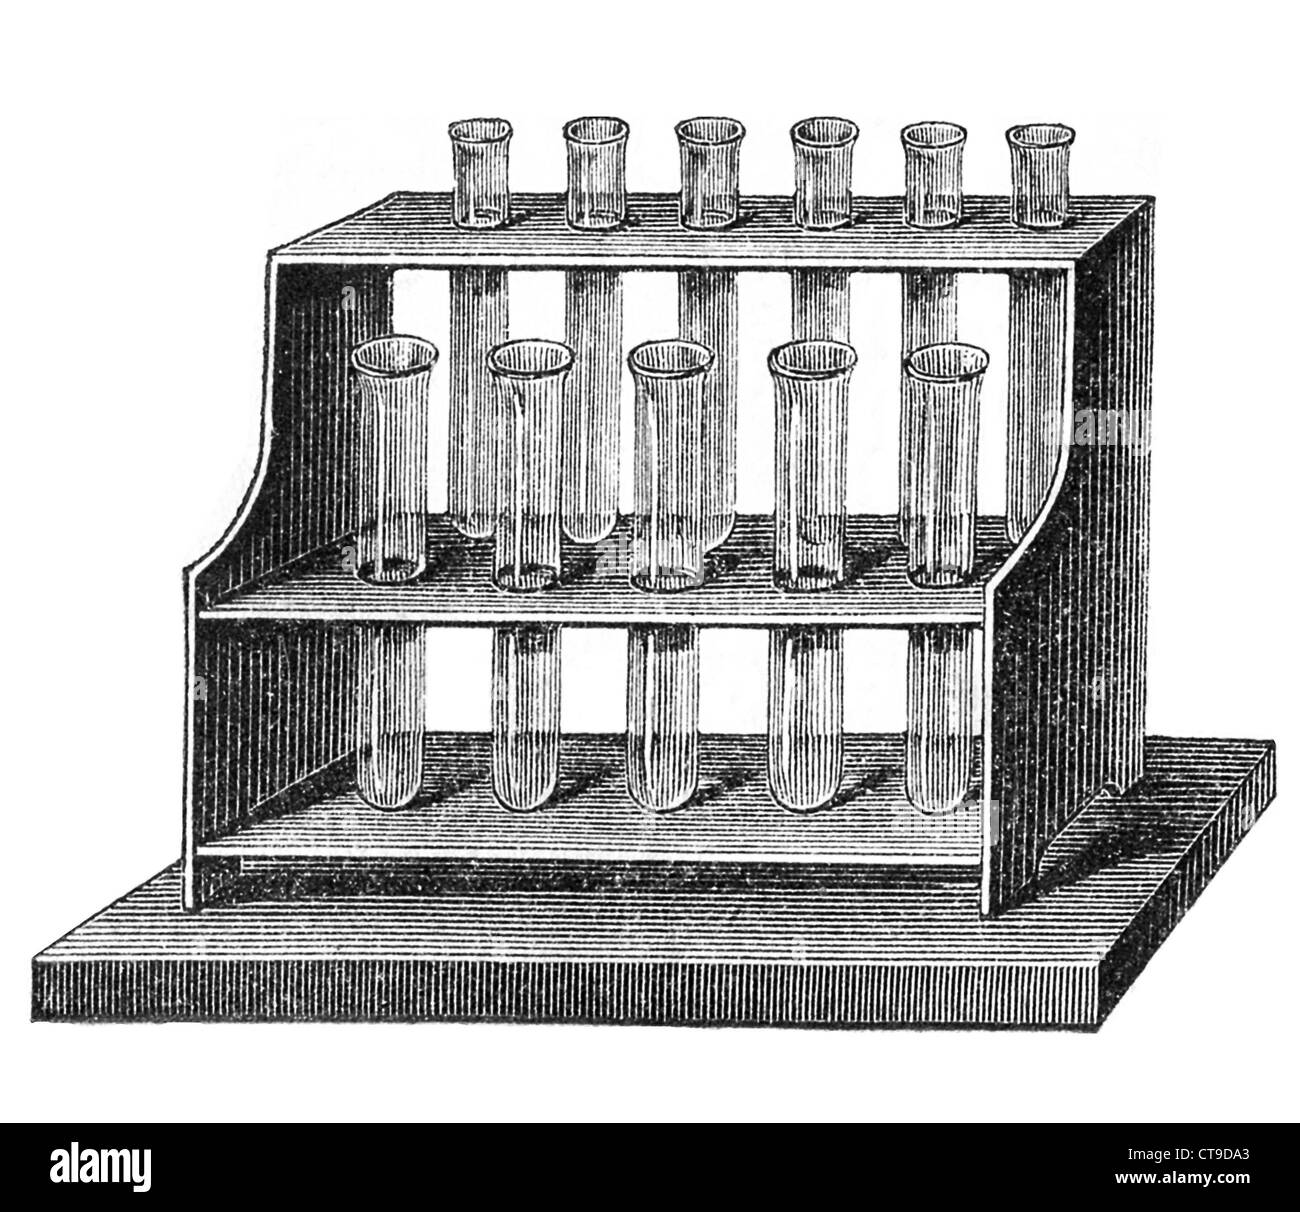 Chemistry: Rack with test tubes for experiment Stock Photo